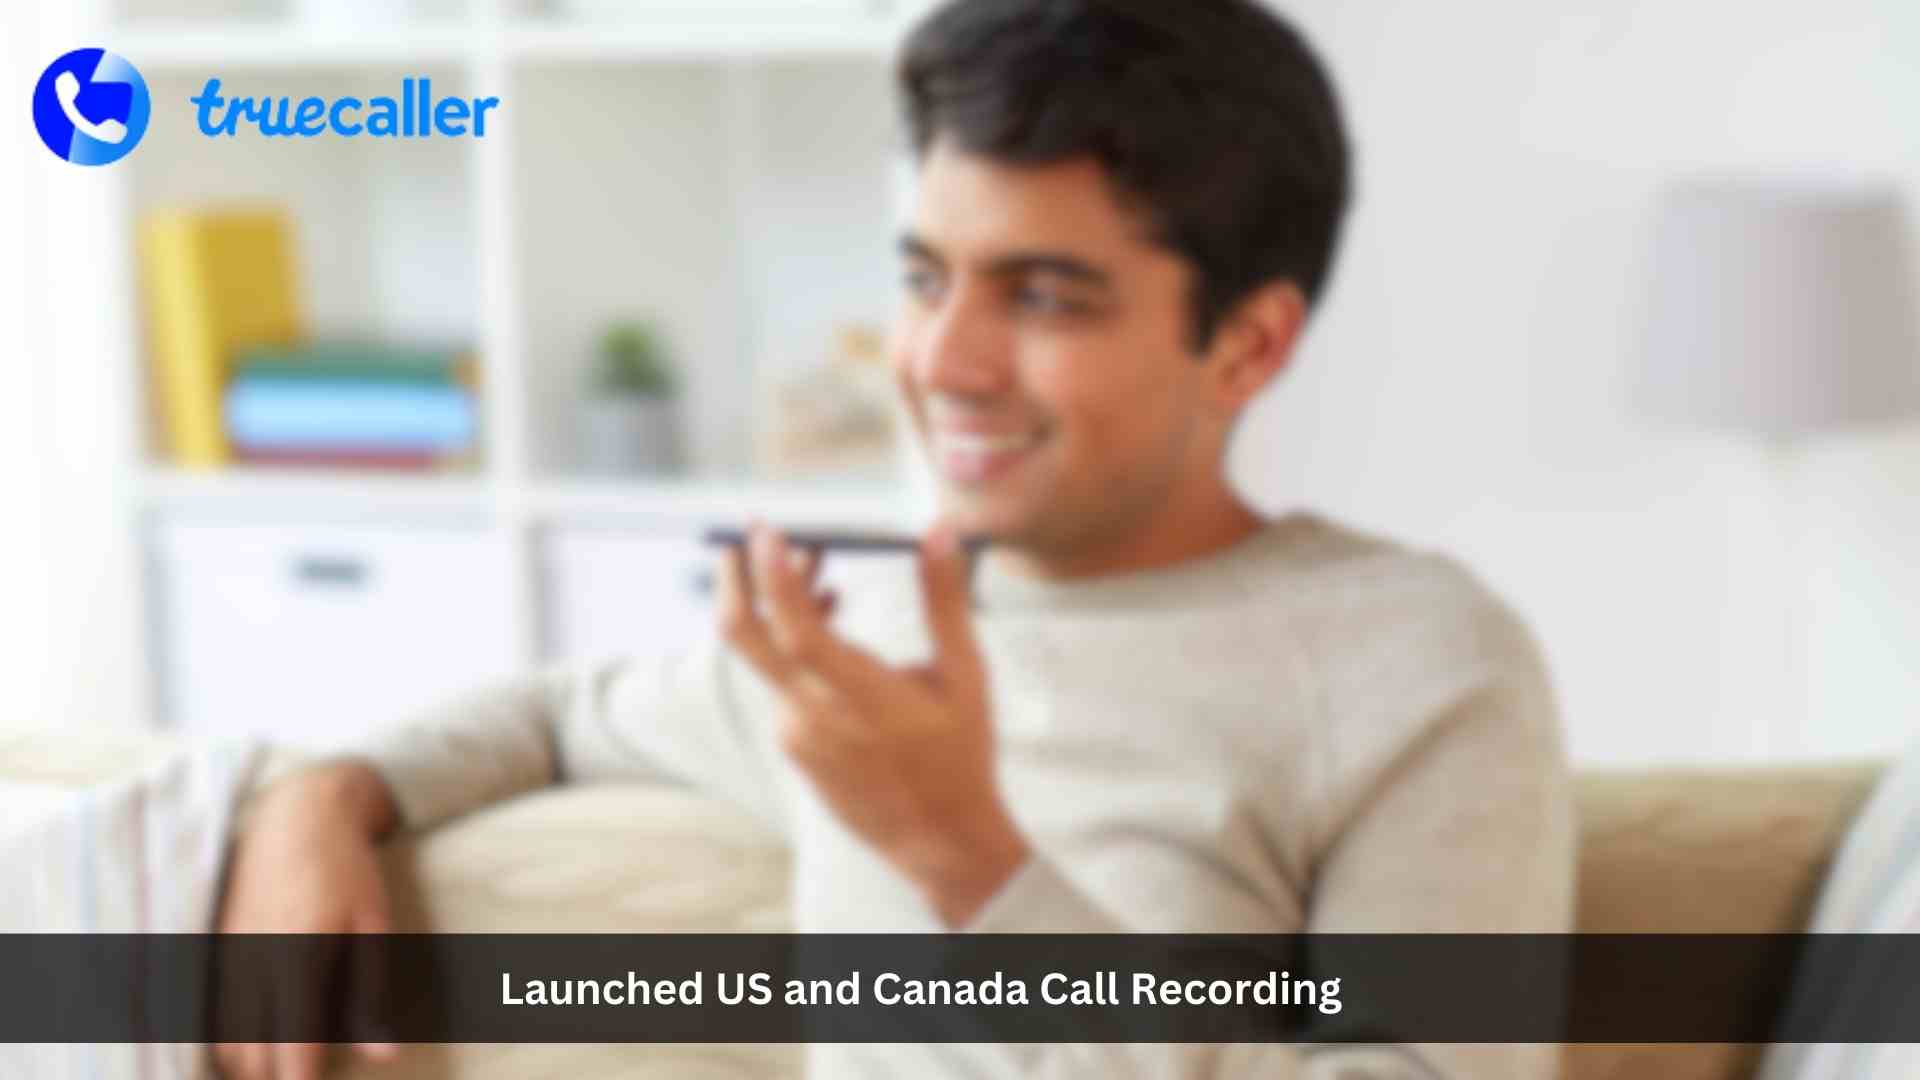 Truecaller Launched US and Canada Call Recording, Providing Professionals with Immediate, AI-powered Transcriptions